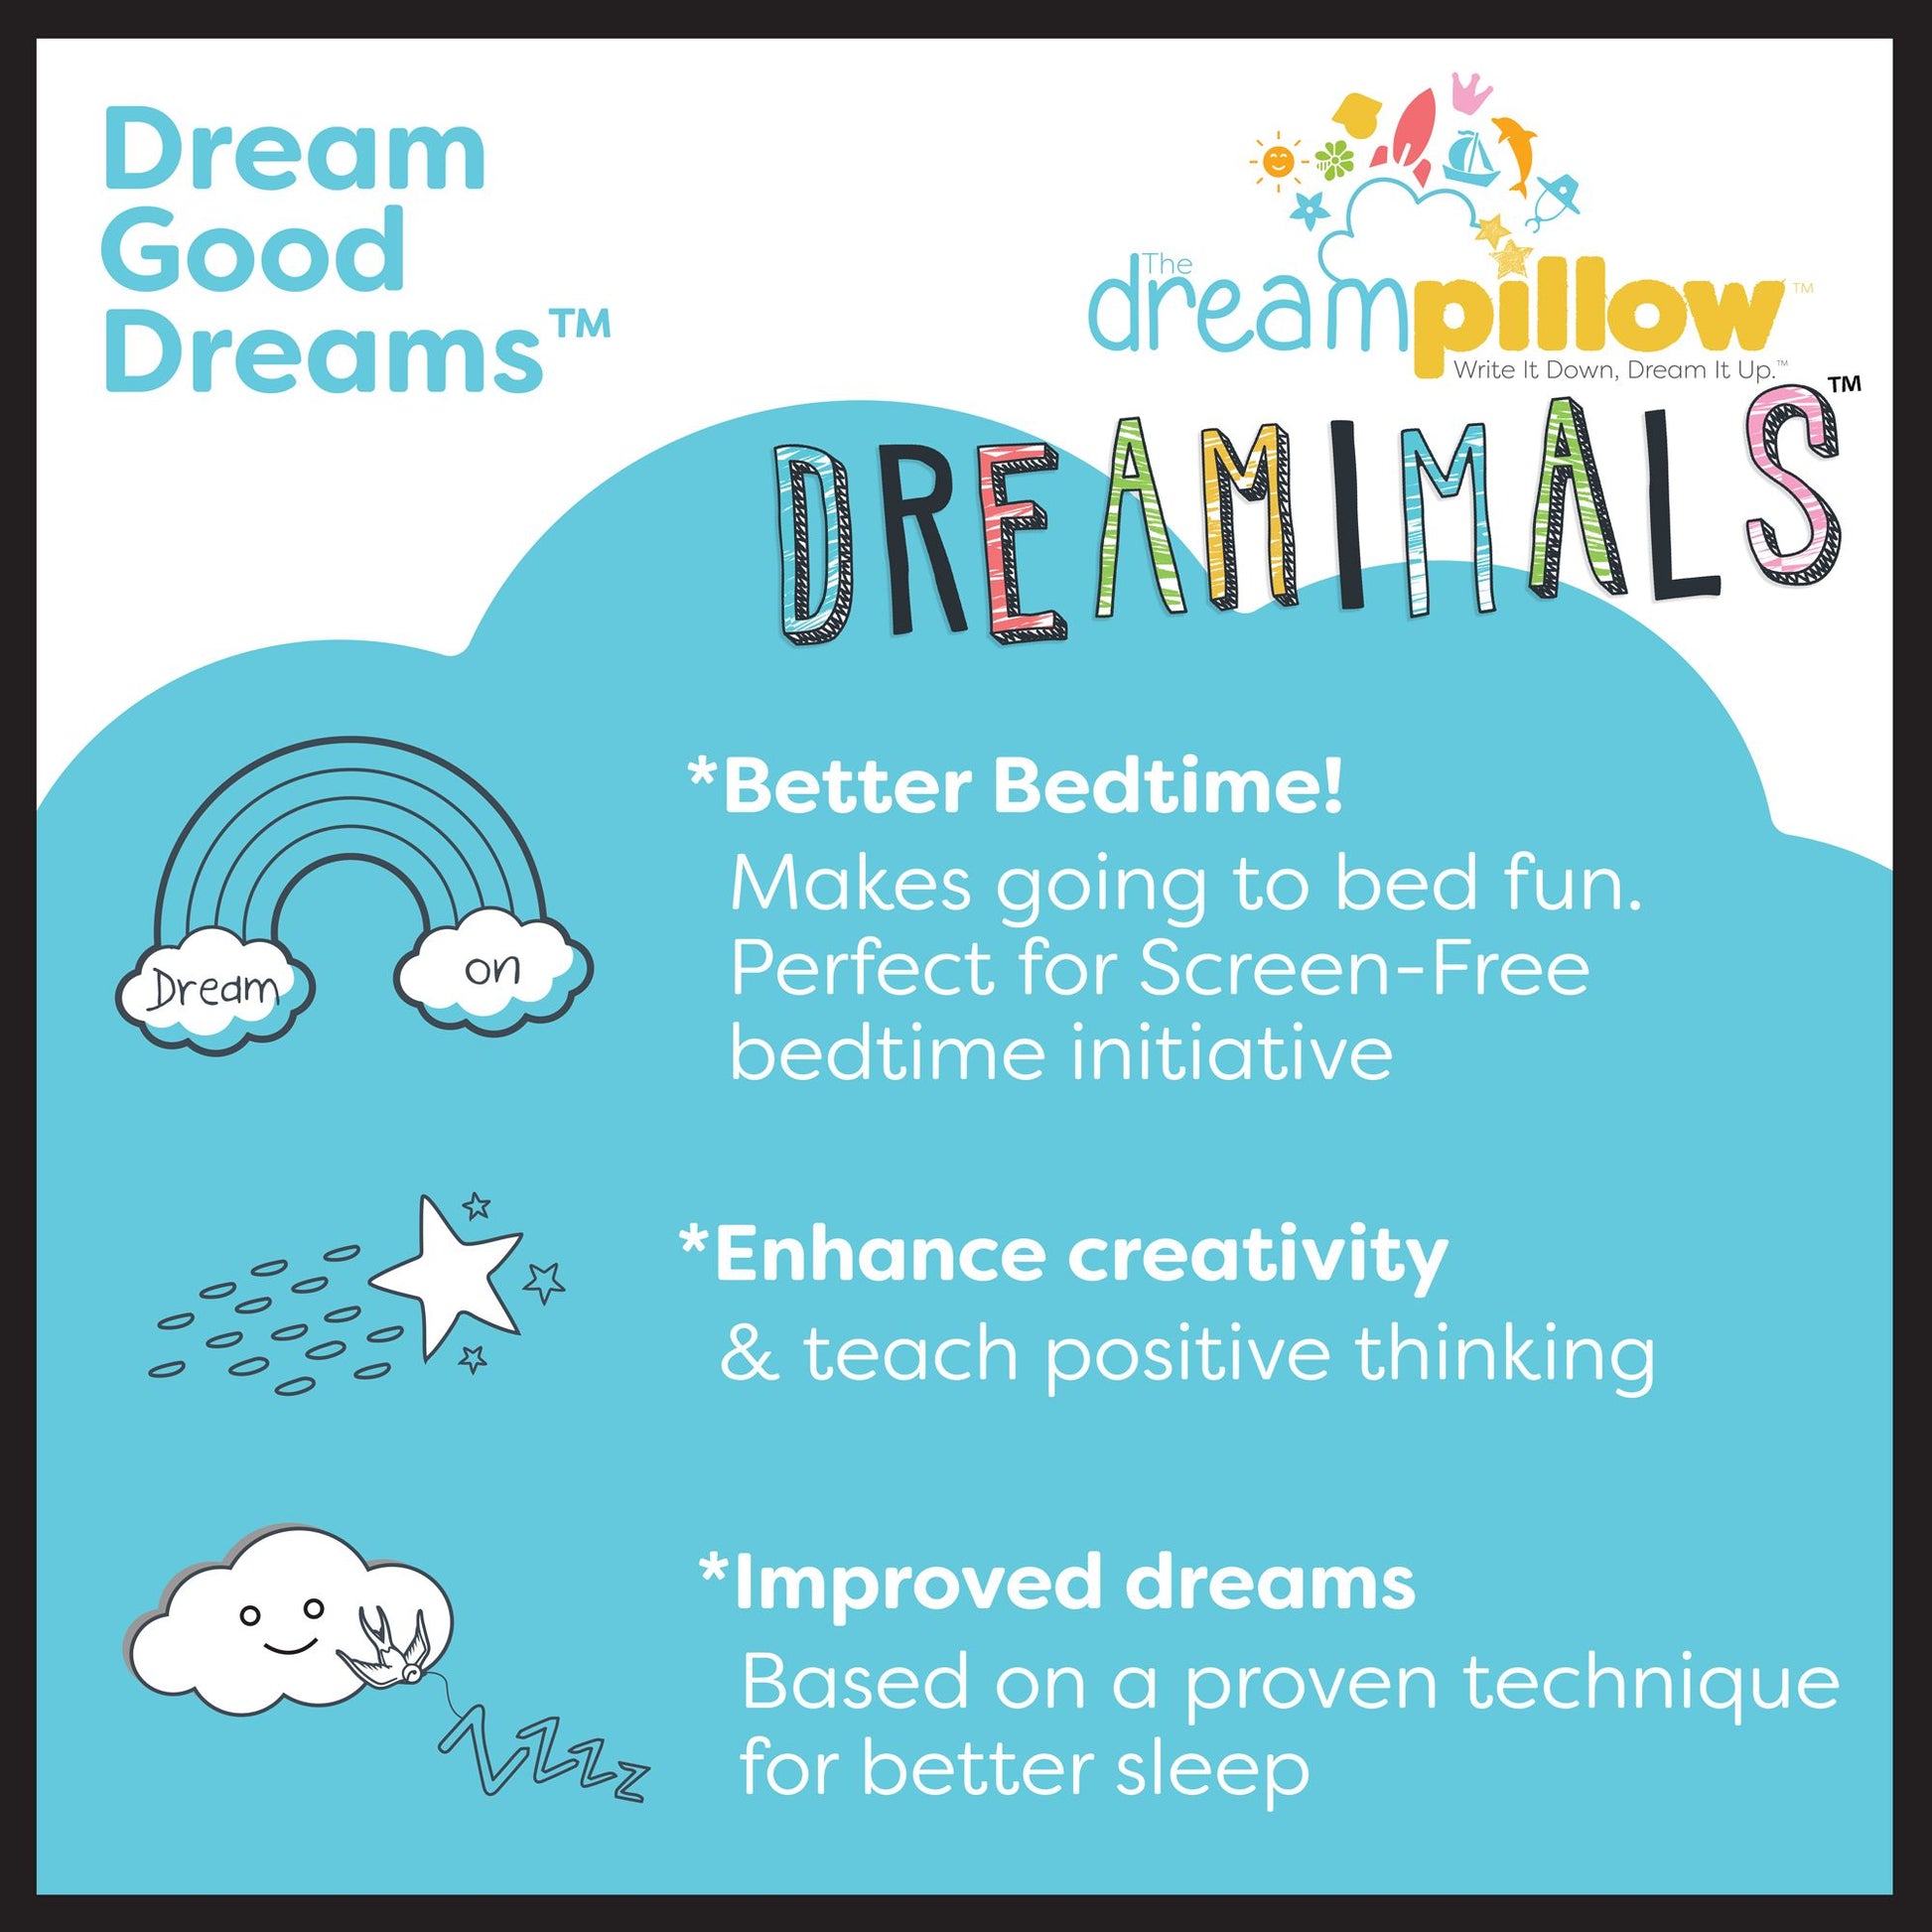 The Dream Pillow - Dreamimals (4845026115618)